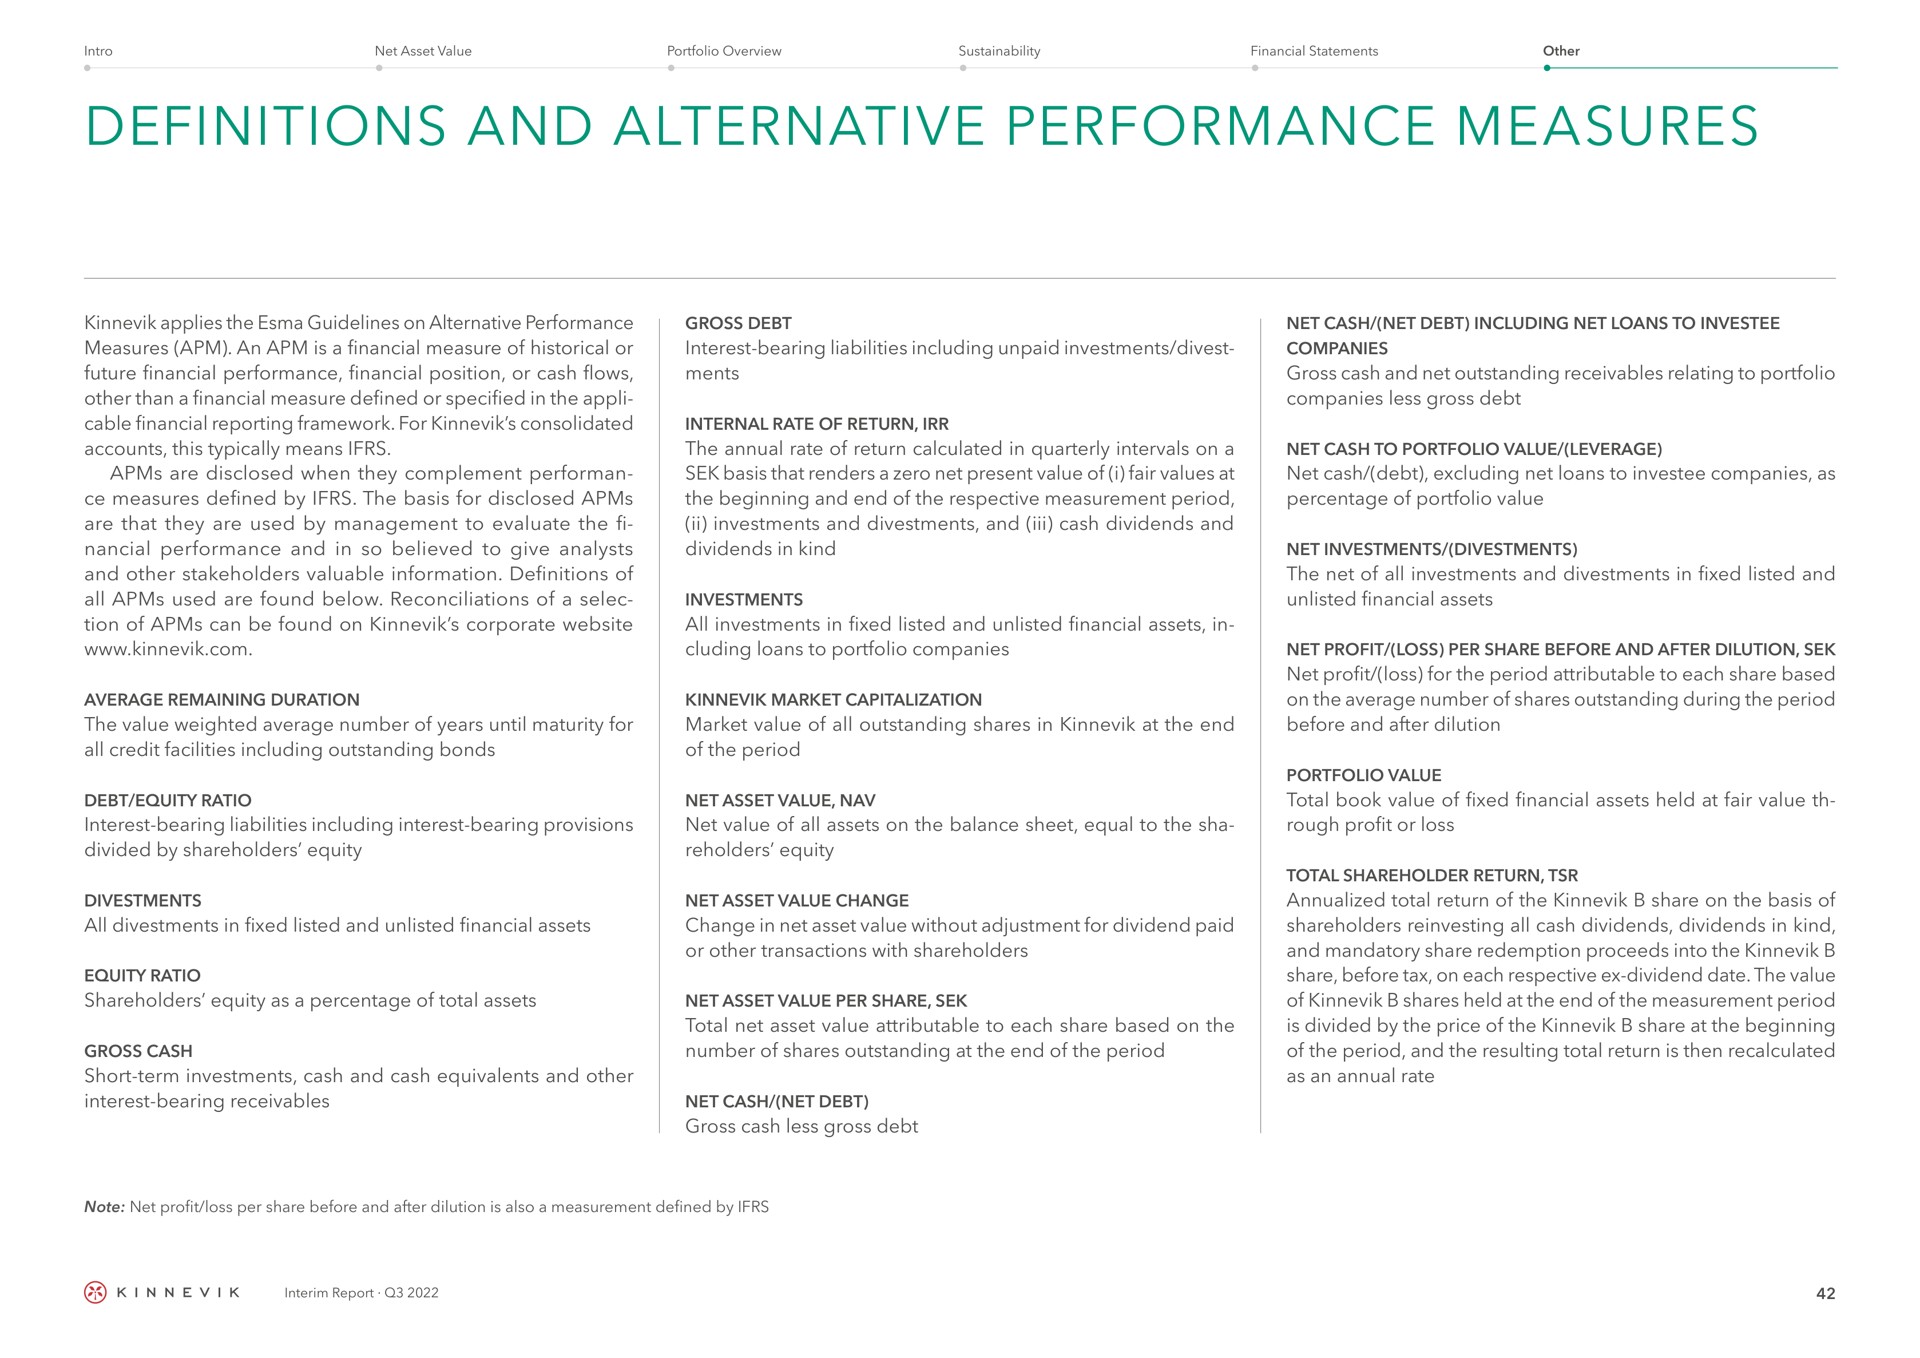 definitions and alternative performance measures interest bearing liabilities including unpaid investments divest gross cash net outstanding receivables relating to portfolio companies less gross debt applies the guidelines on other than a financial measure defined or specified in the cable financial reporting framework for consolidated accounts this typically means are disclosed when they complement defined by the basis for disclosed are that they are used by management to evaluate the in so believed to give analysts other stakeholders valuable information of all used are found below reconciliations of a of can be found on corporate the annual rate of return calculated in quarterly intervals on a the beginning end of the respective measurement period dividends in kind loans to portfolio companies the value weighted average number of years until maturity for all credit facilities including outstanding bonds market value of all outstanding shares in at the end of the period interest bearing liabilities including interest bearing provisions divided by shareholders equity net value of all assets on the balance sheet equal to the sha equity shareholders equity as a percentage of total assets interest bearing receivables change in net asset value without adjustment for dividend paid or other transactions with shareholders total net asset value attributable to each share based on the number of shares outstanding at the end of the period gross cash less gross debt percentage of portfolio value on the average number of shares outstanding during the period before after dilution rough profit or loss total return of the share on the basis of mandatory share redemption proceeds into the of shares held at the end of the measurement period is divided by the price of the share at the beginning of the period the resulting total return is then recalculated as an annual rate | Kinnevik